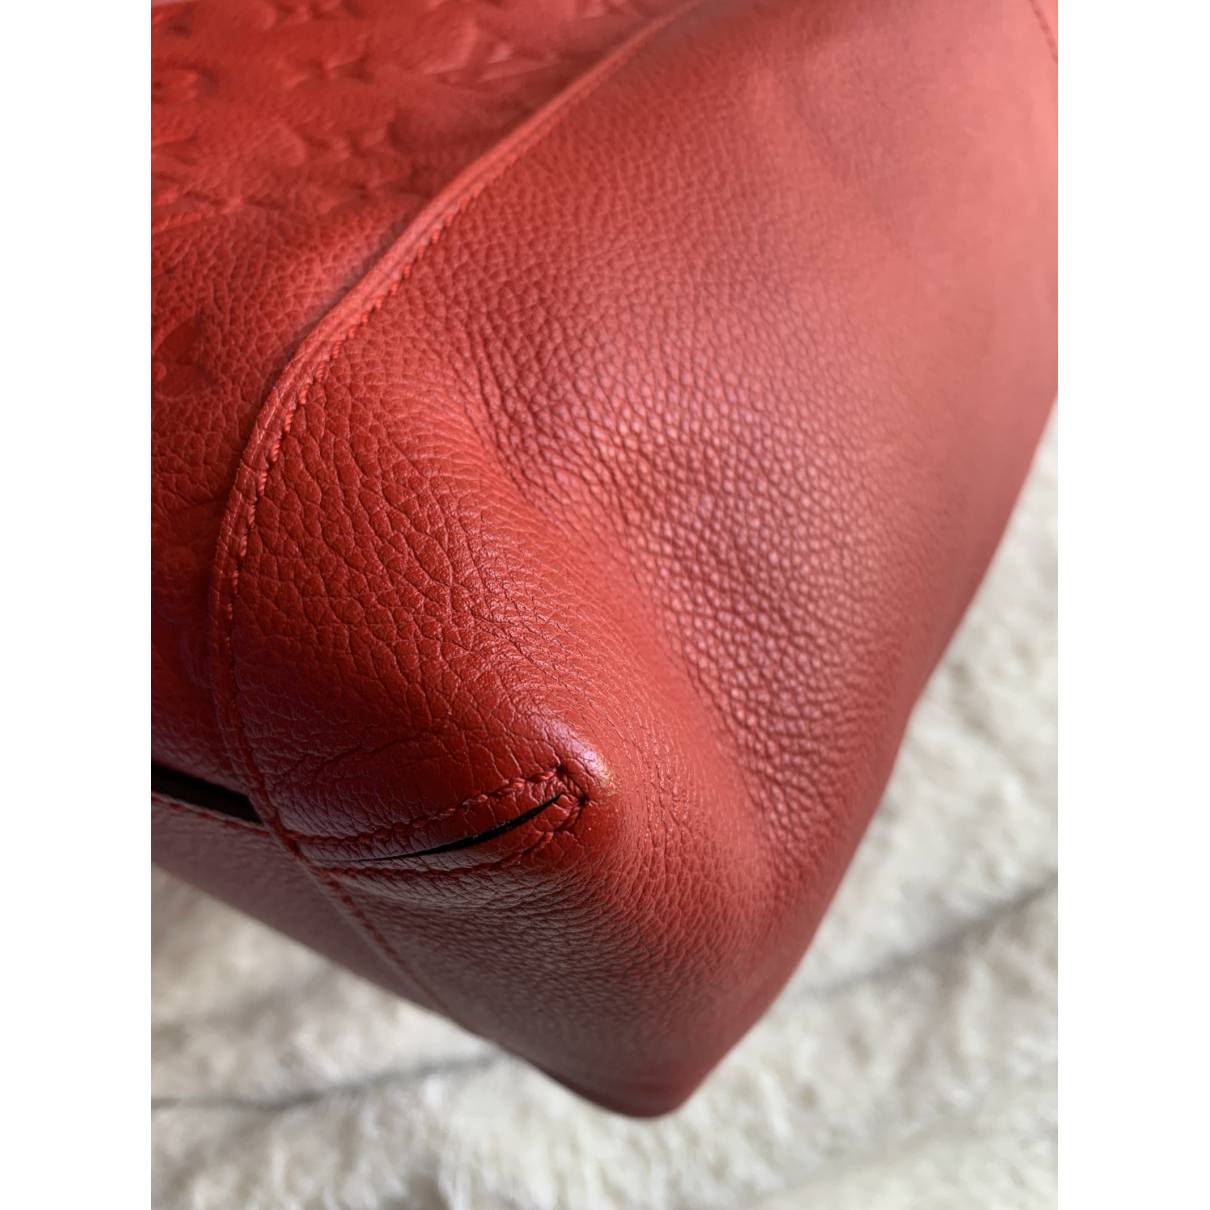 Louis Vuitton - Authenticated Bagatelle Handbag - Leather Red Plain For Woman, Very Good Condition